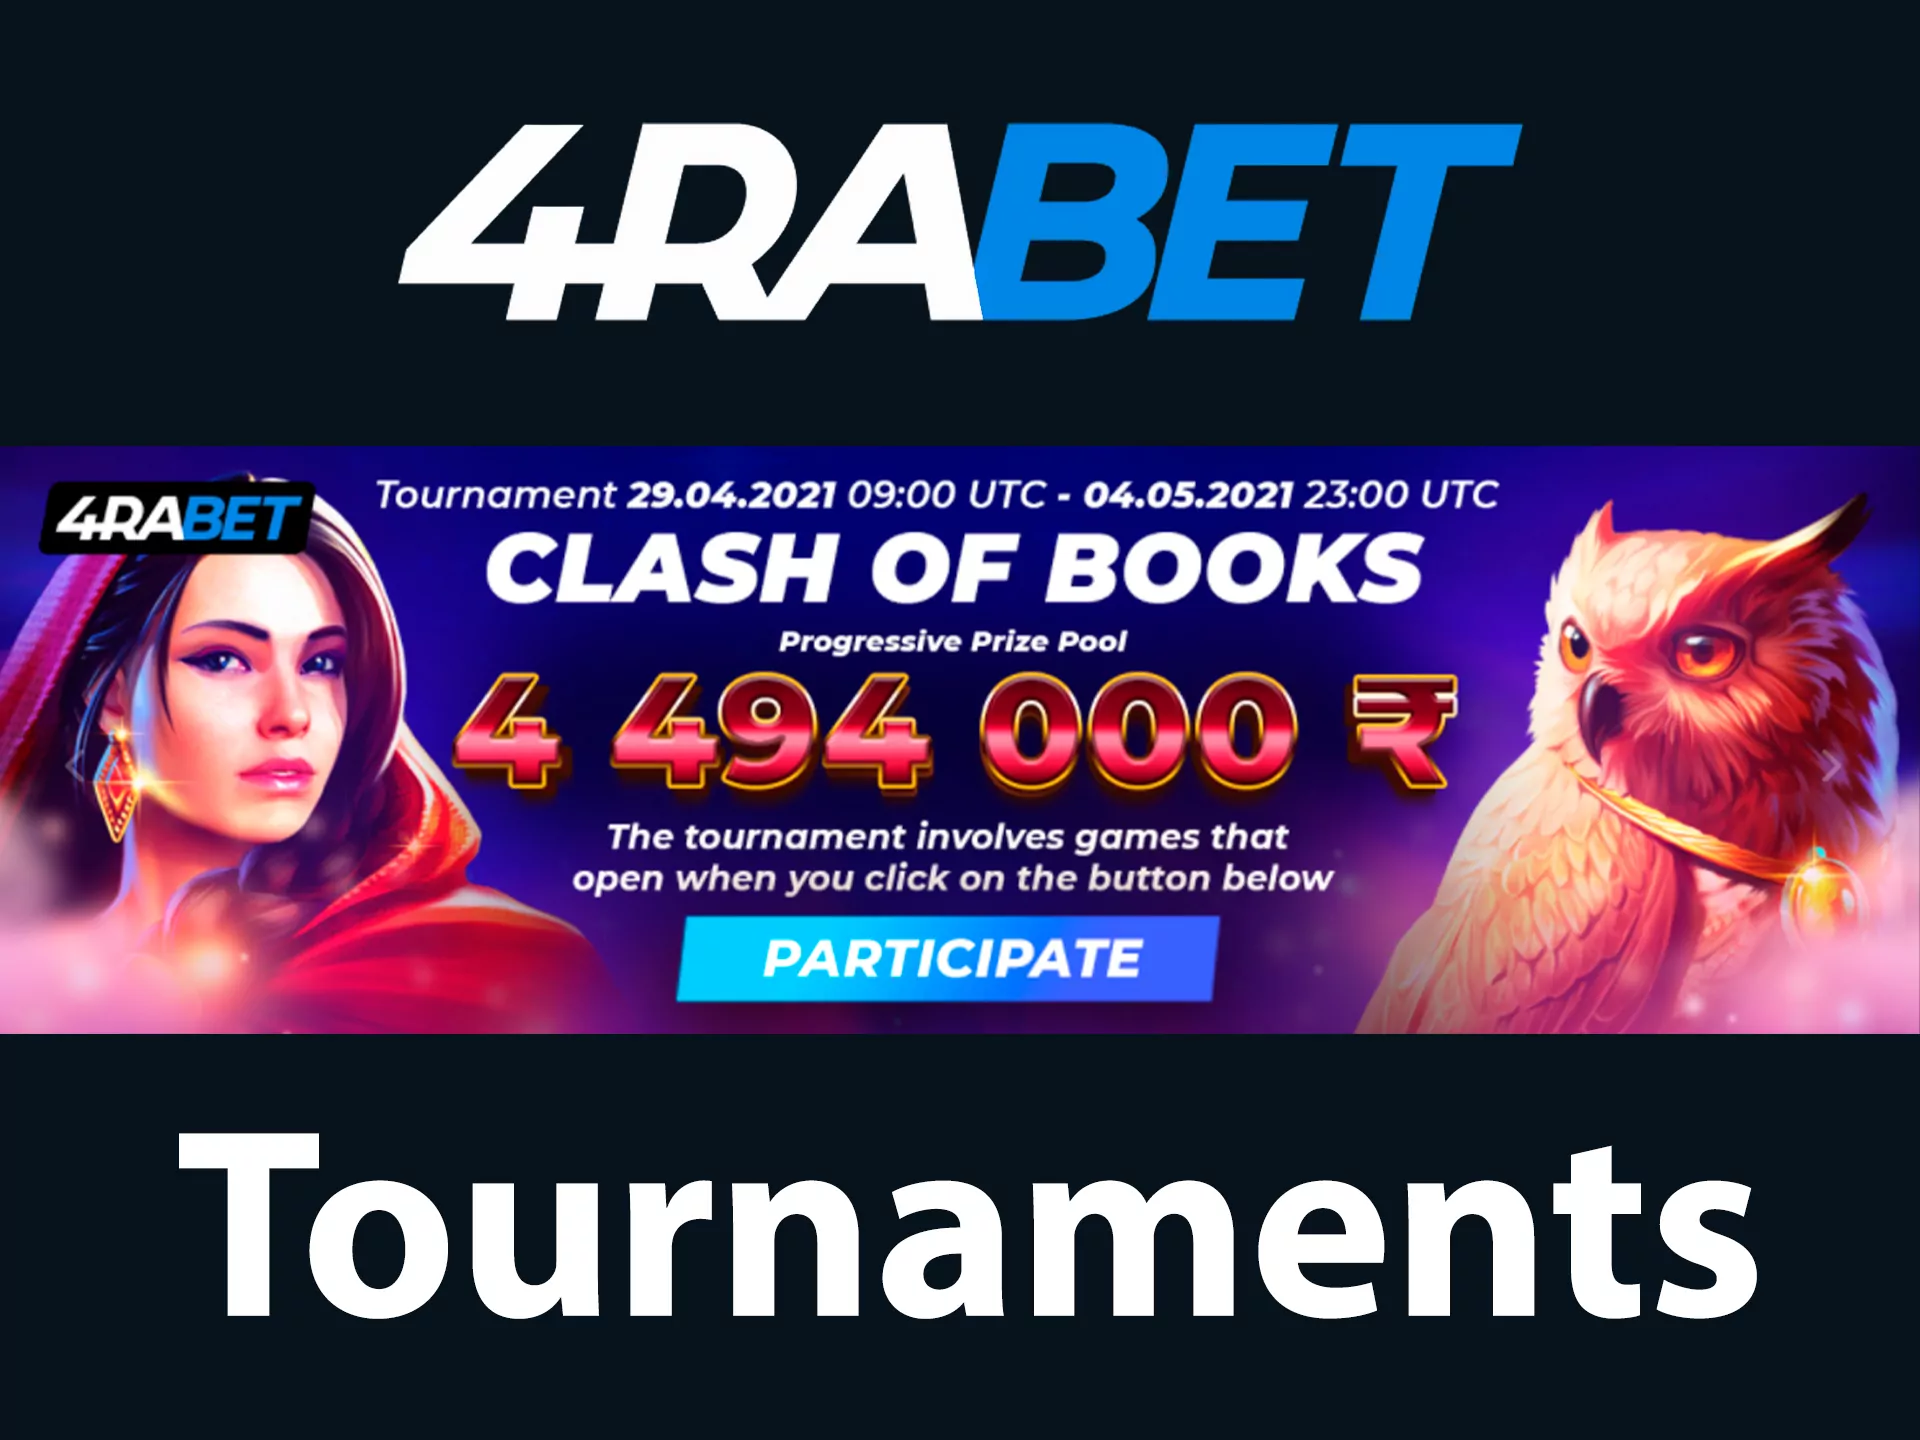 Participate in 4rabet and win prizes from casino games.